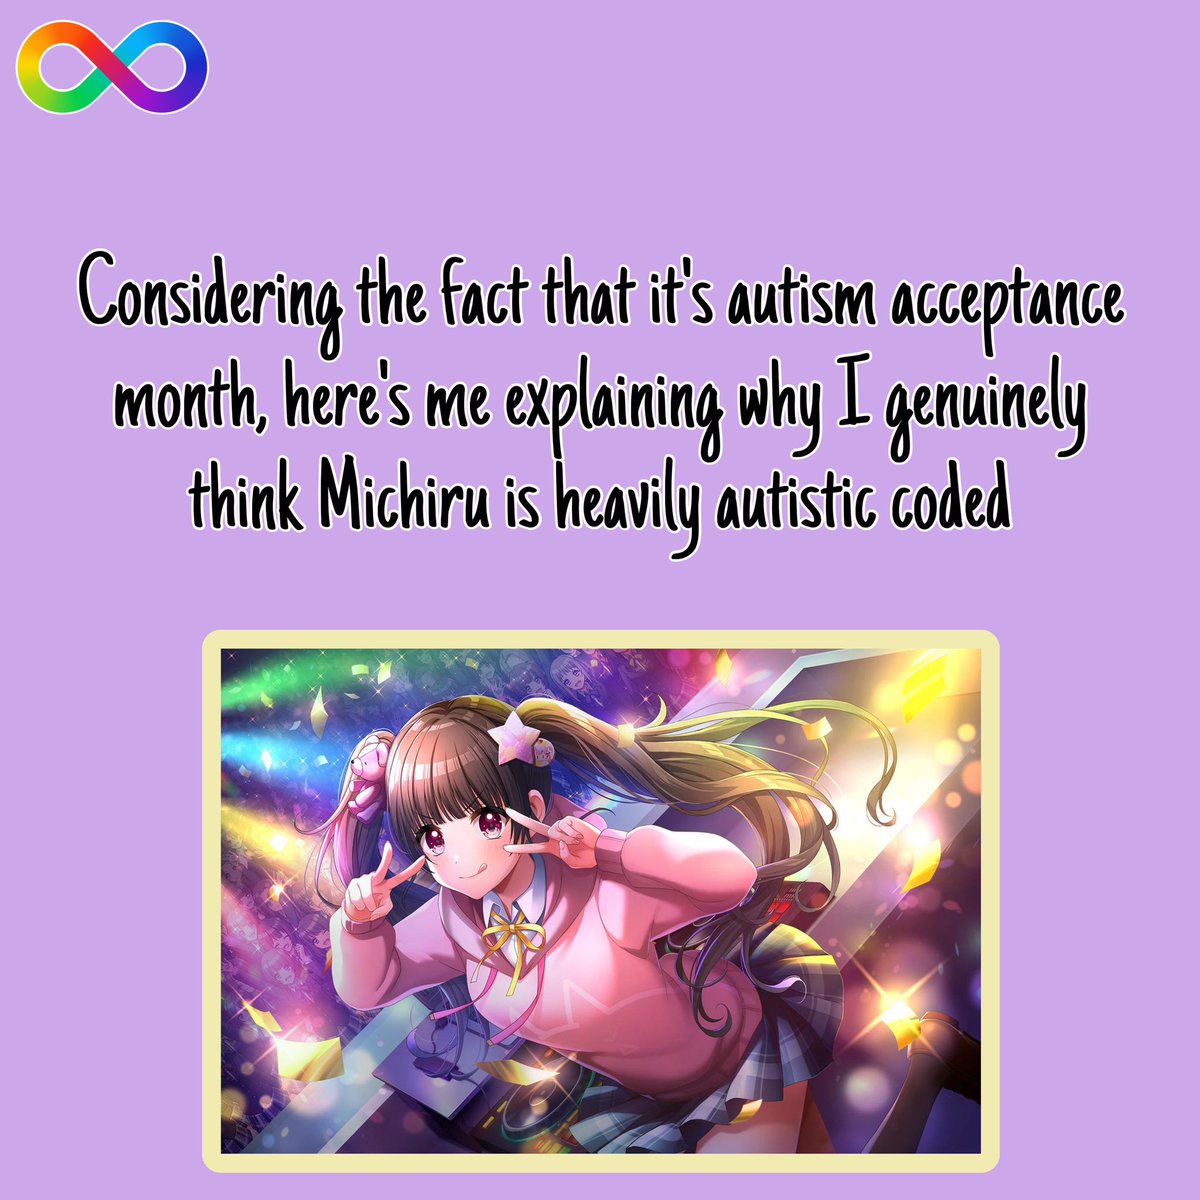 Here’s an updated reasons why I think Michiru Kaibara is autistic coded 🧵